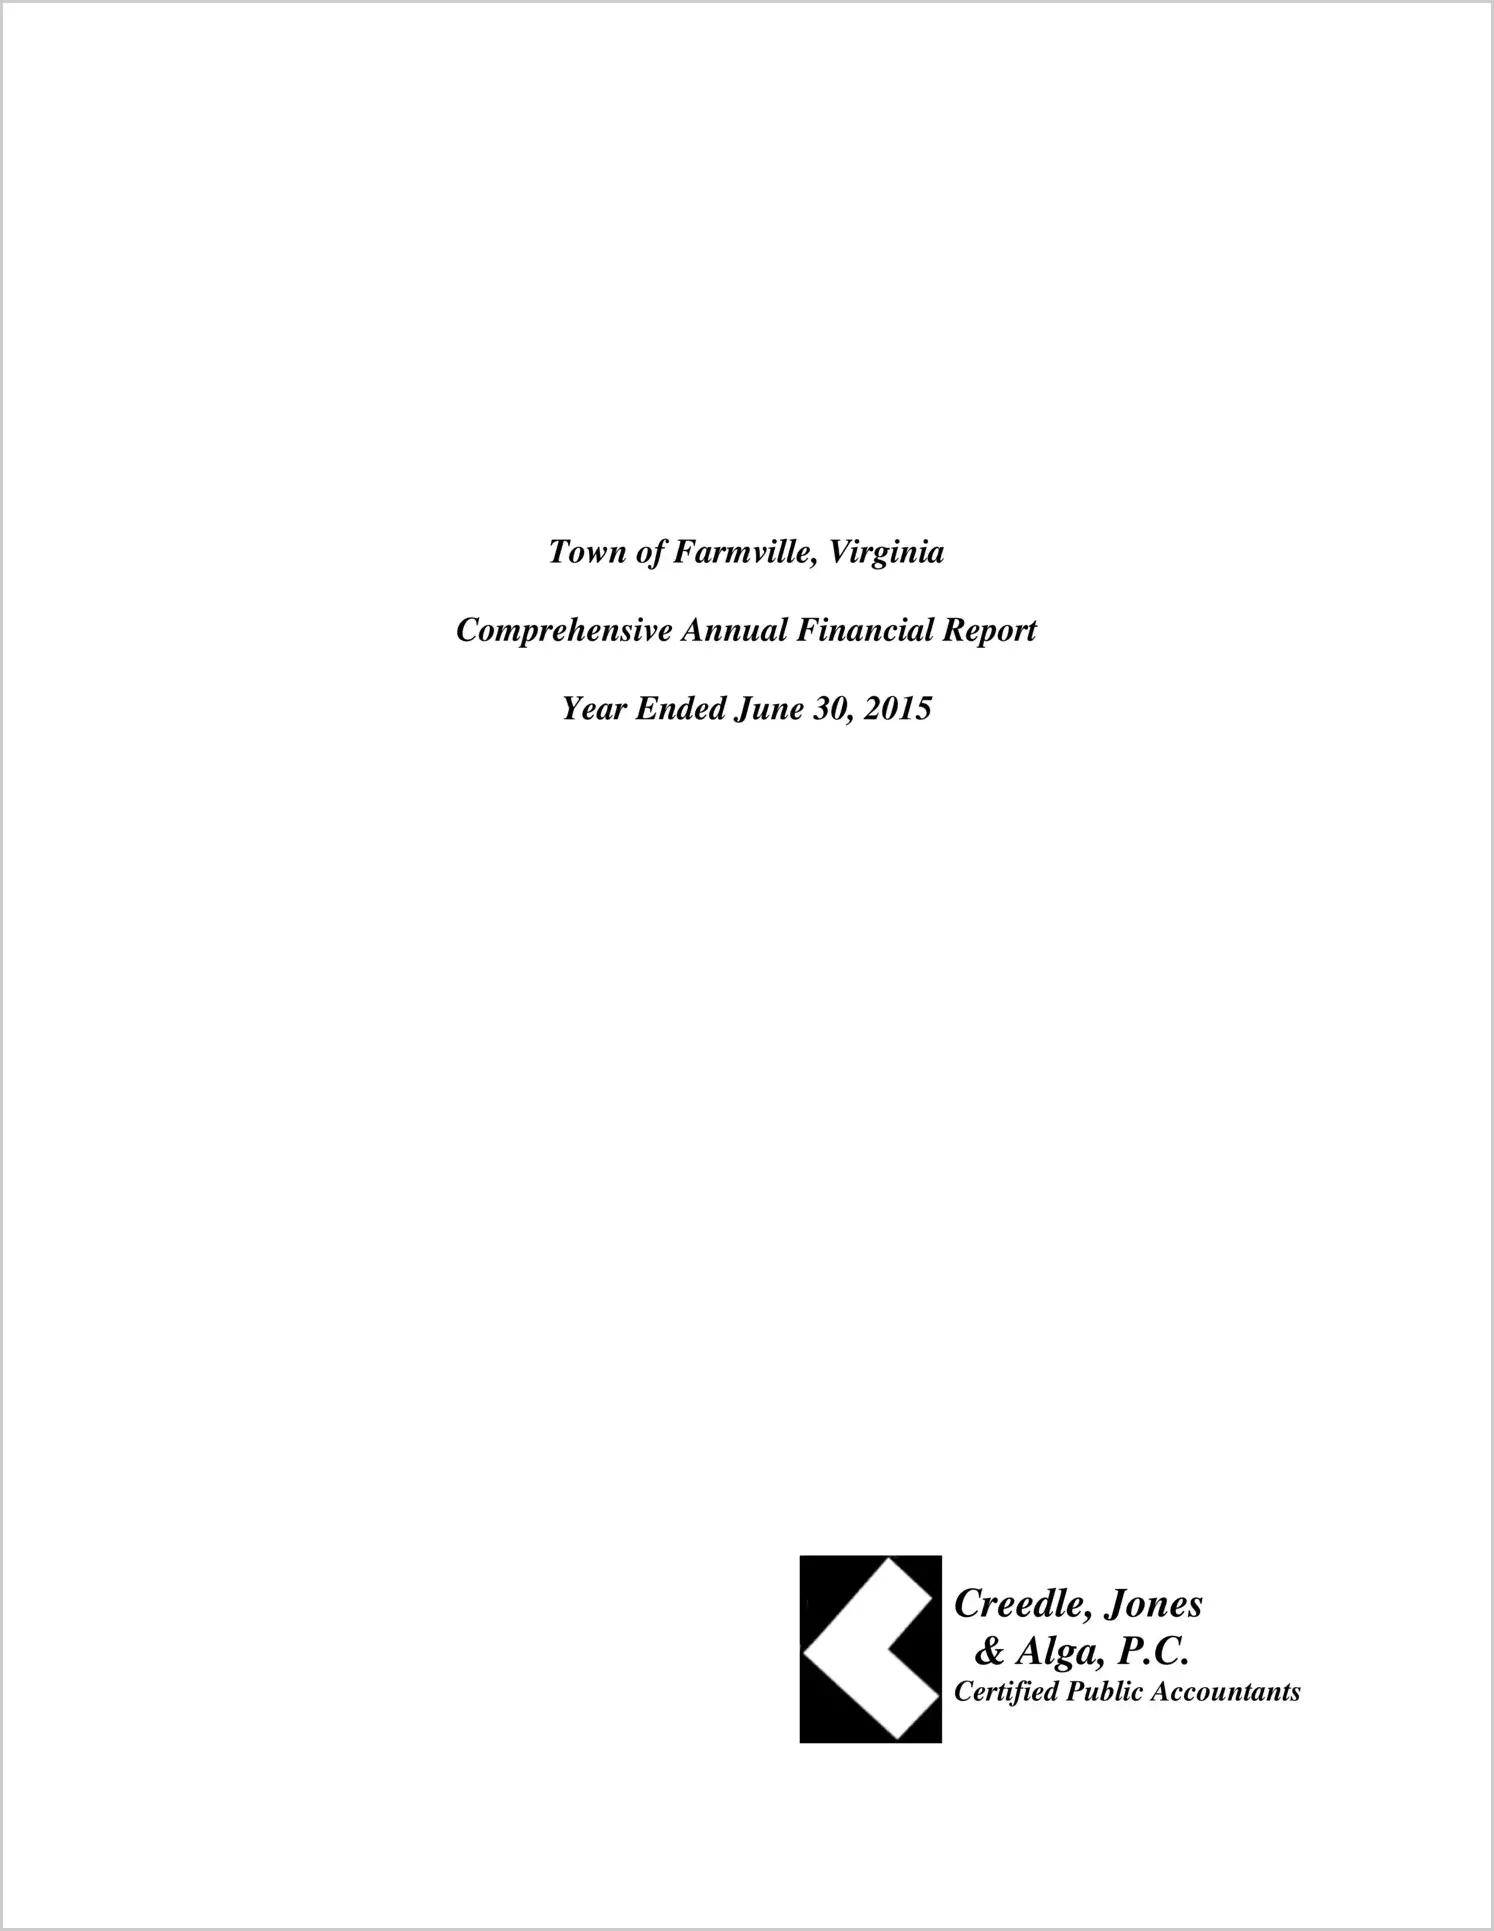 2015 Annual Financial Report for Town of Farmville